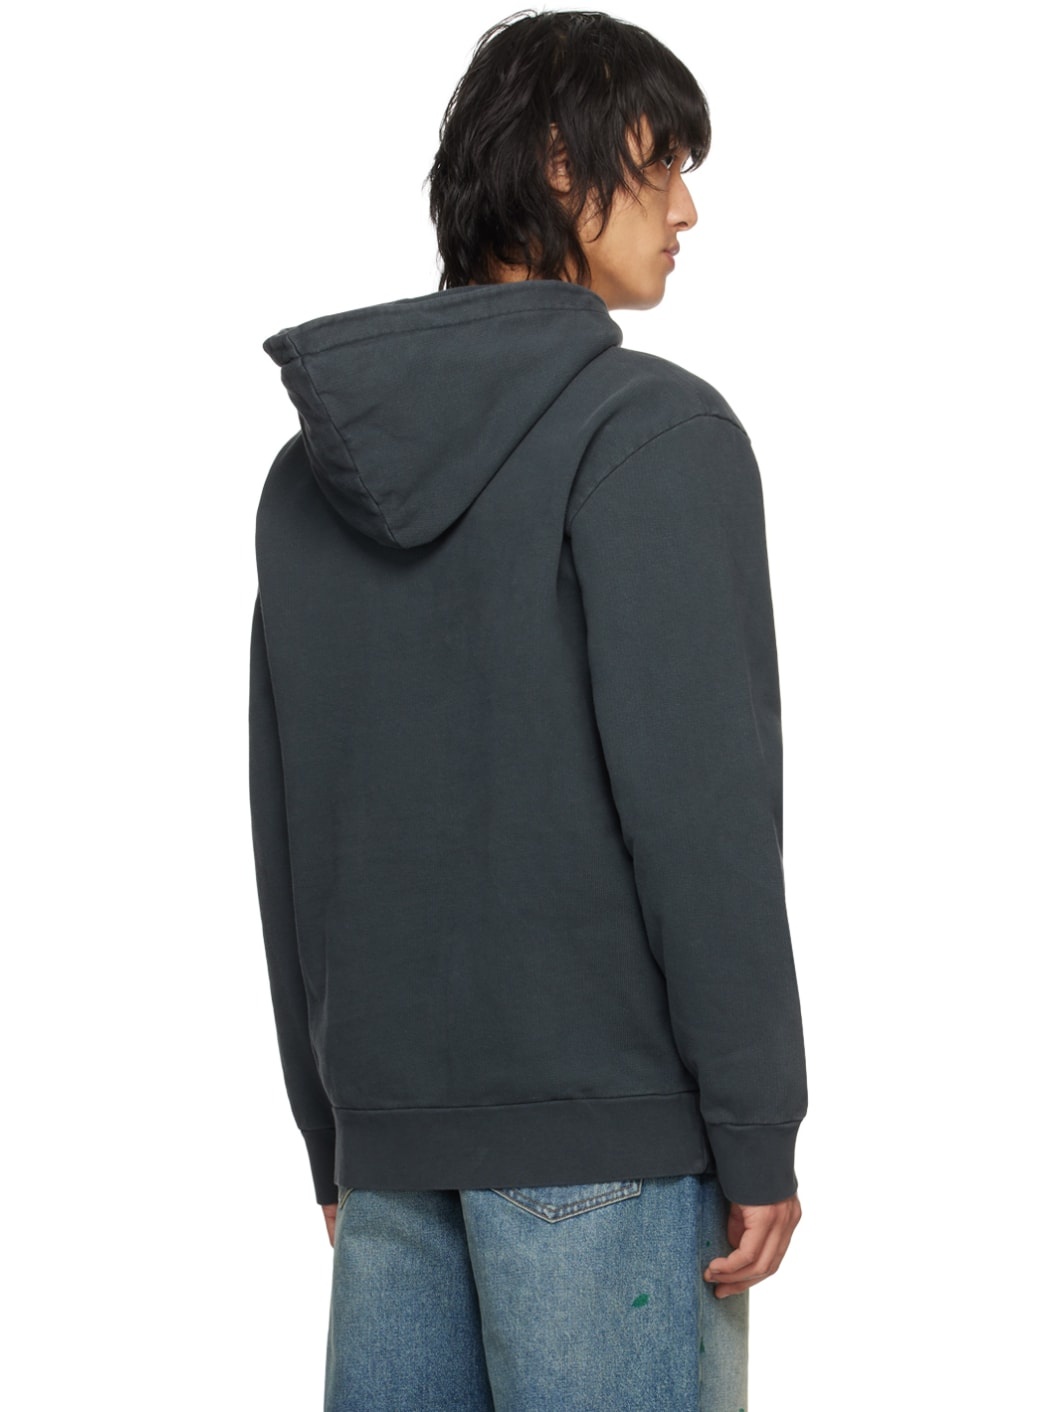 Gray City Washed Hoodie - 3